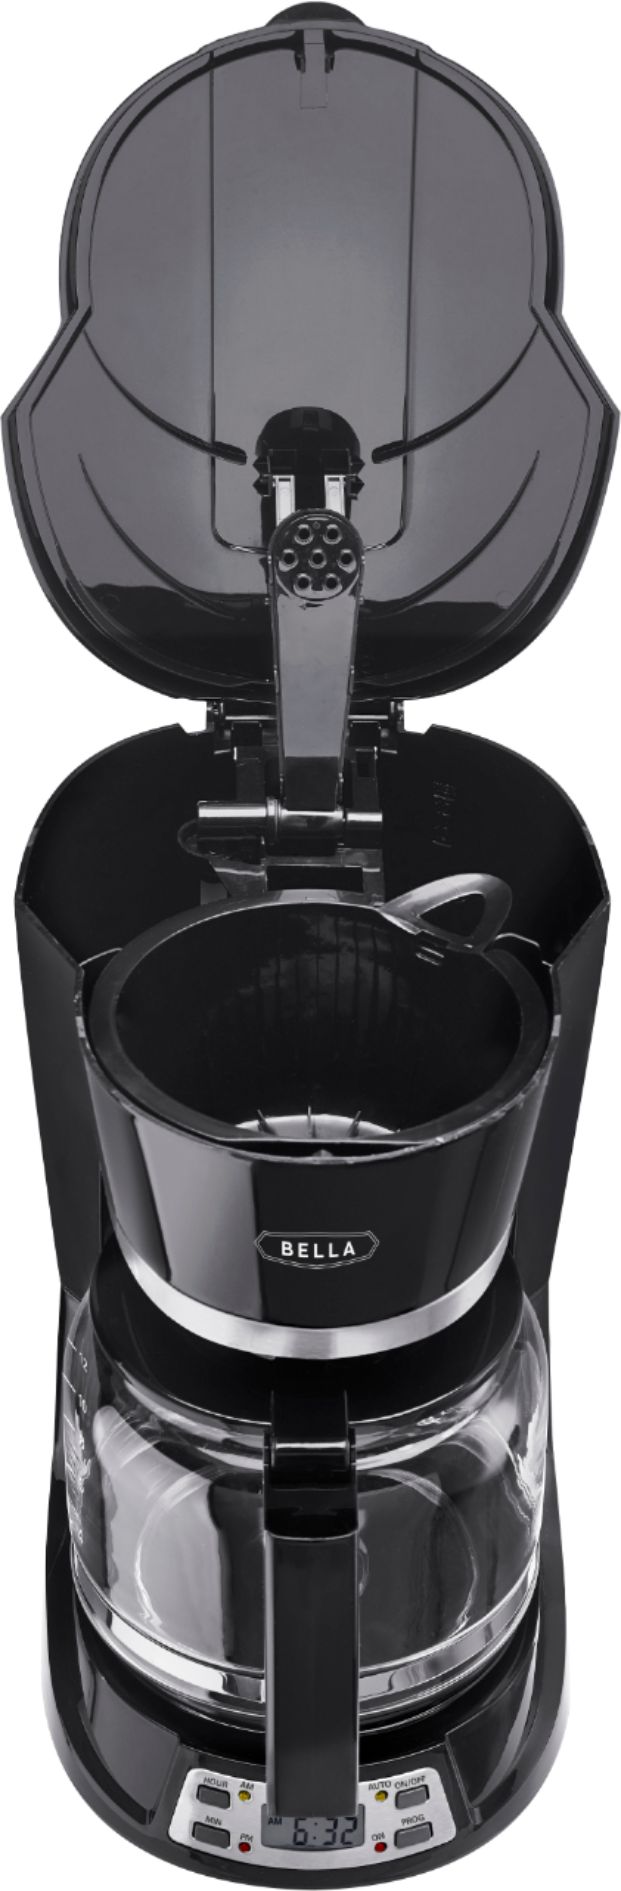 Bella Linea Collection 12 Cup Coffee Maker